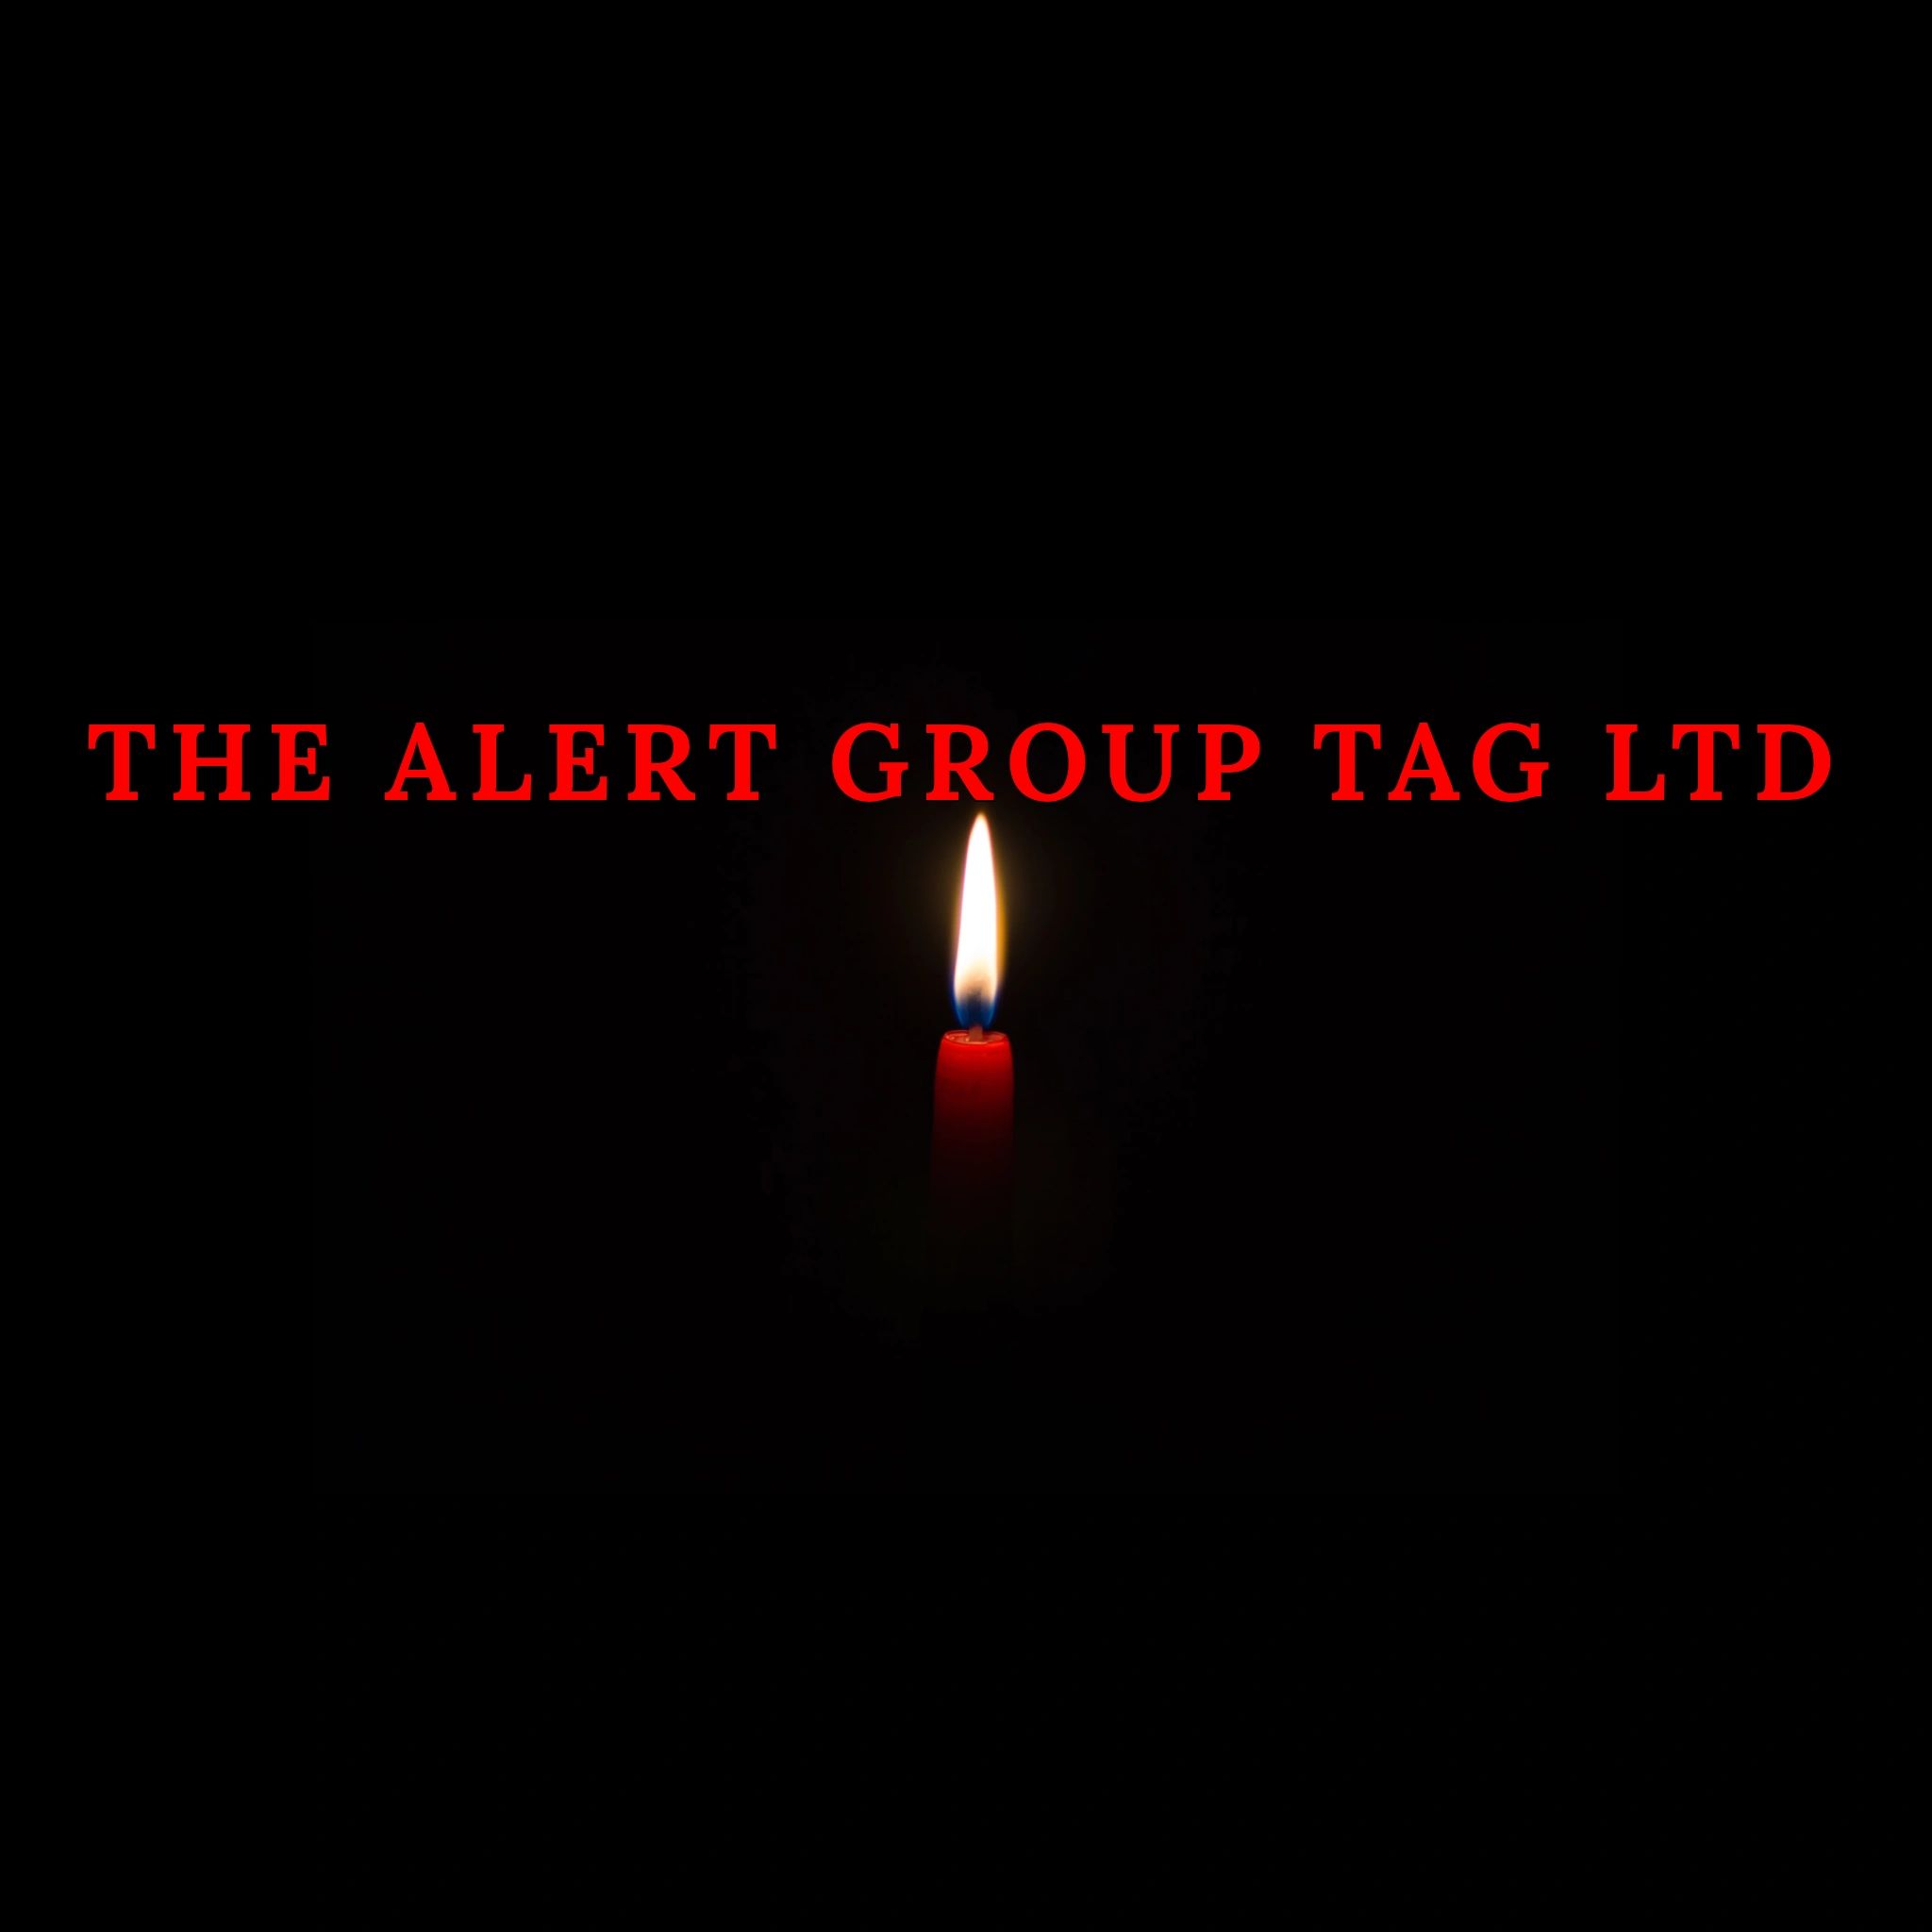 THE ALERT GROUP TAG LTD displayed in red with a lit red candle centred underneath. black background.